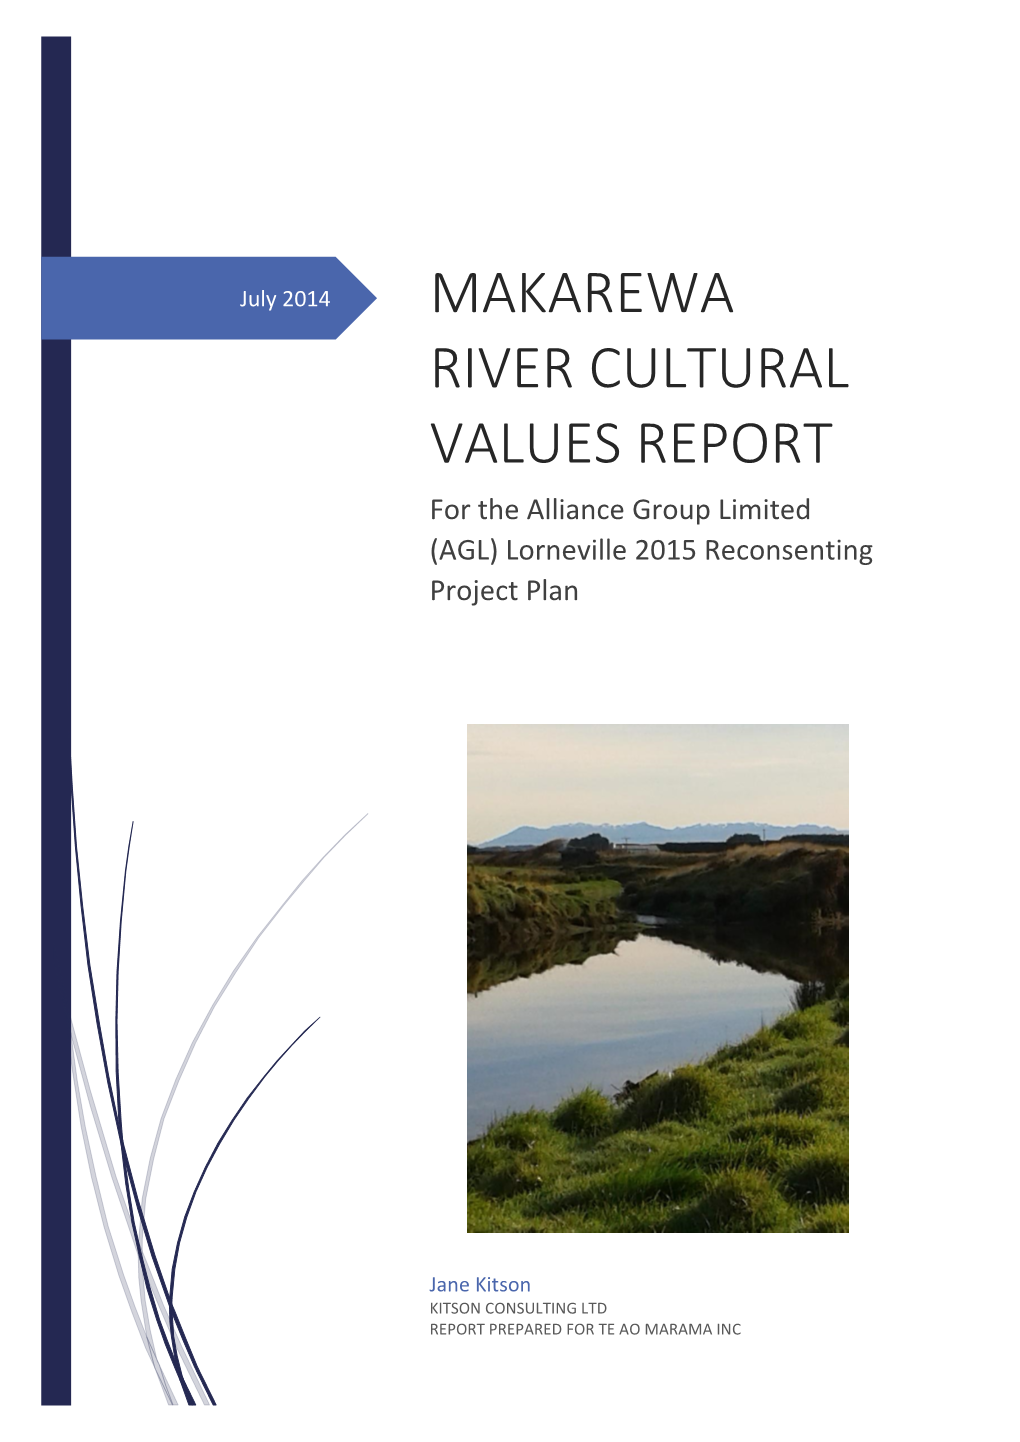 MAKAREWA RIVER CULTURAL VALUES REPORT for the Alliance Group Limited (AGL) Lorneville 2015 Reconsenting Project Plan